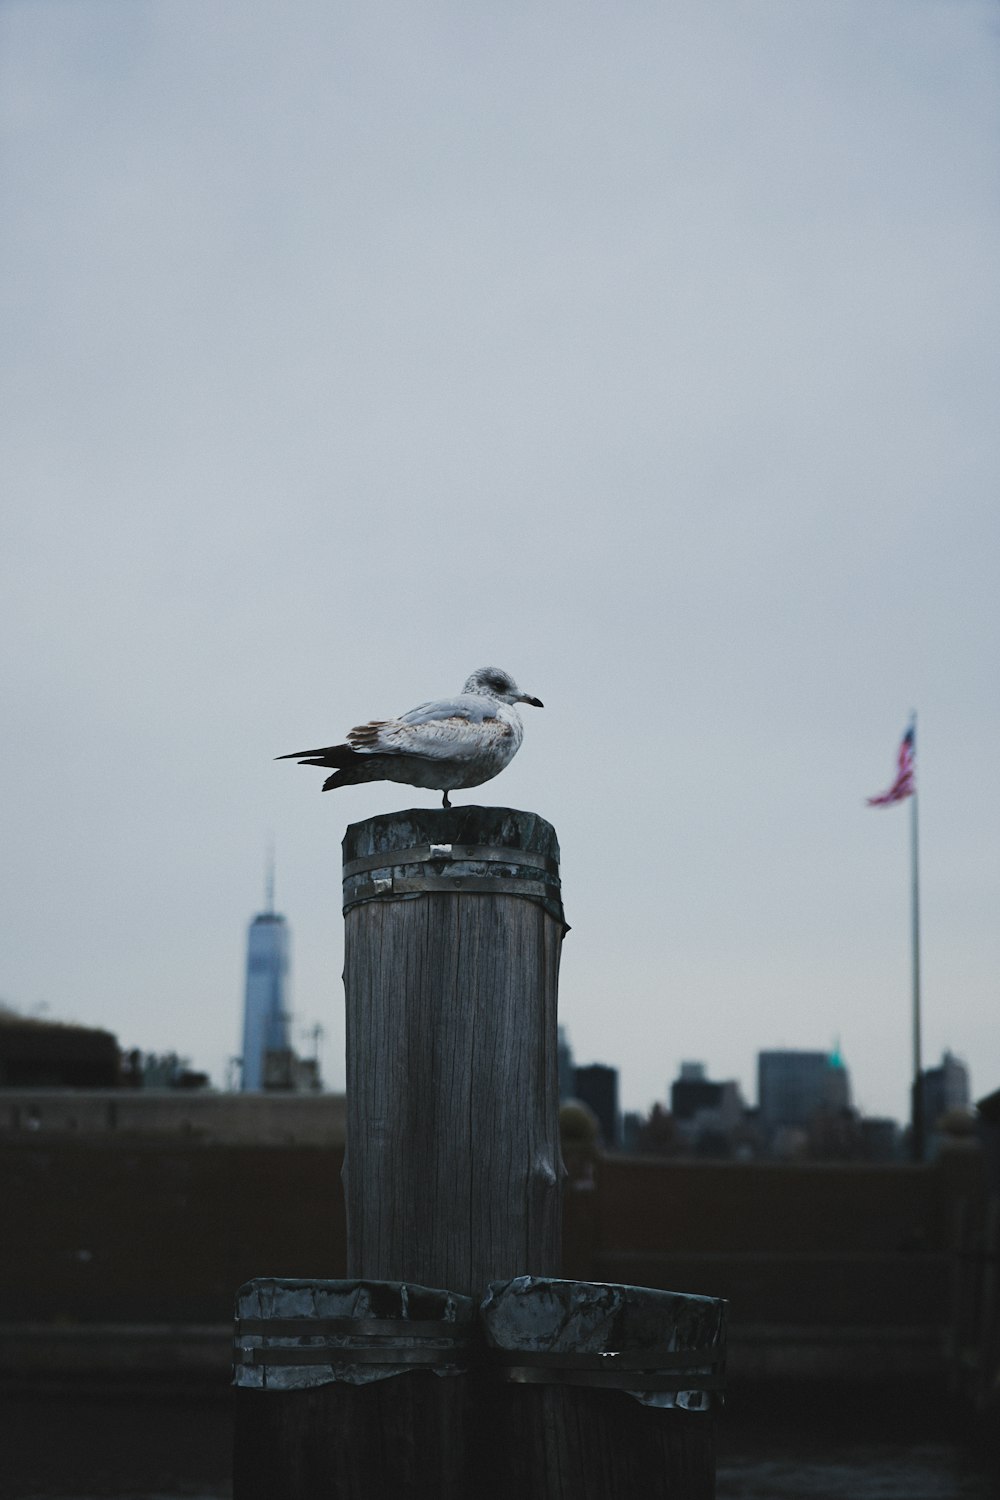 a seagull sitting on top of a wooden post